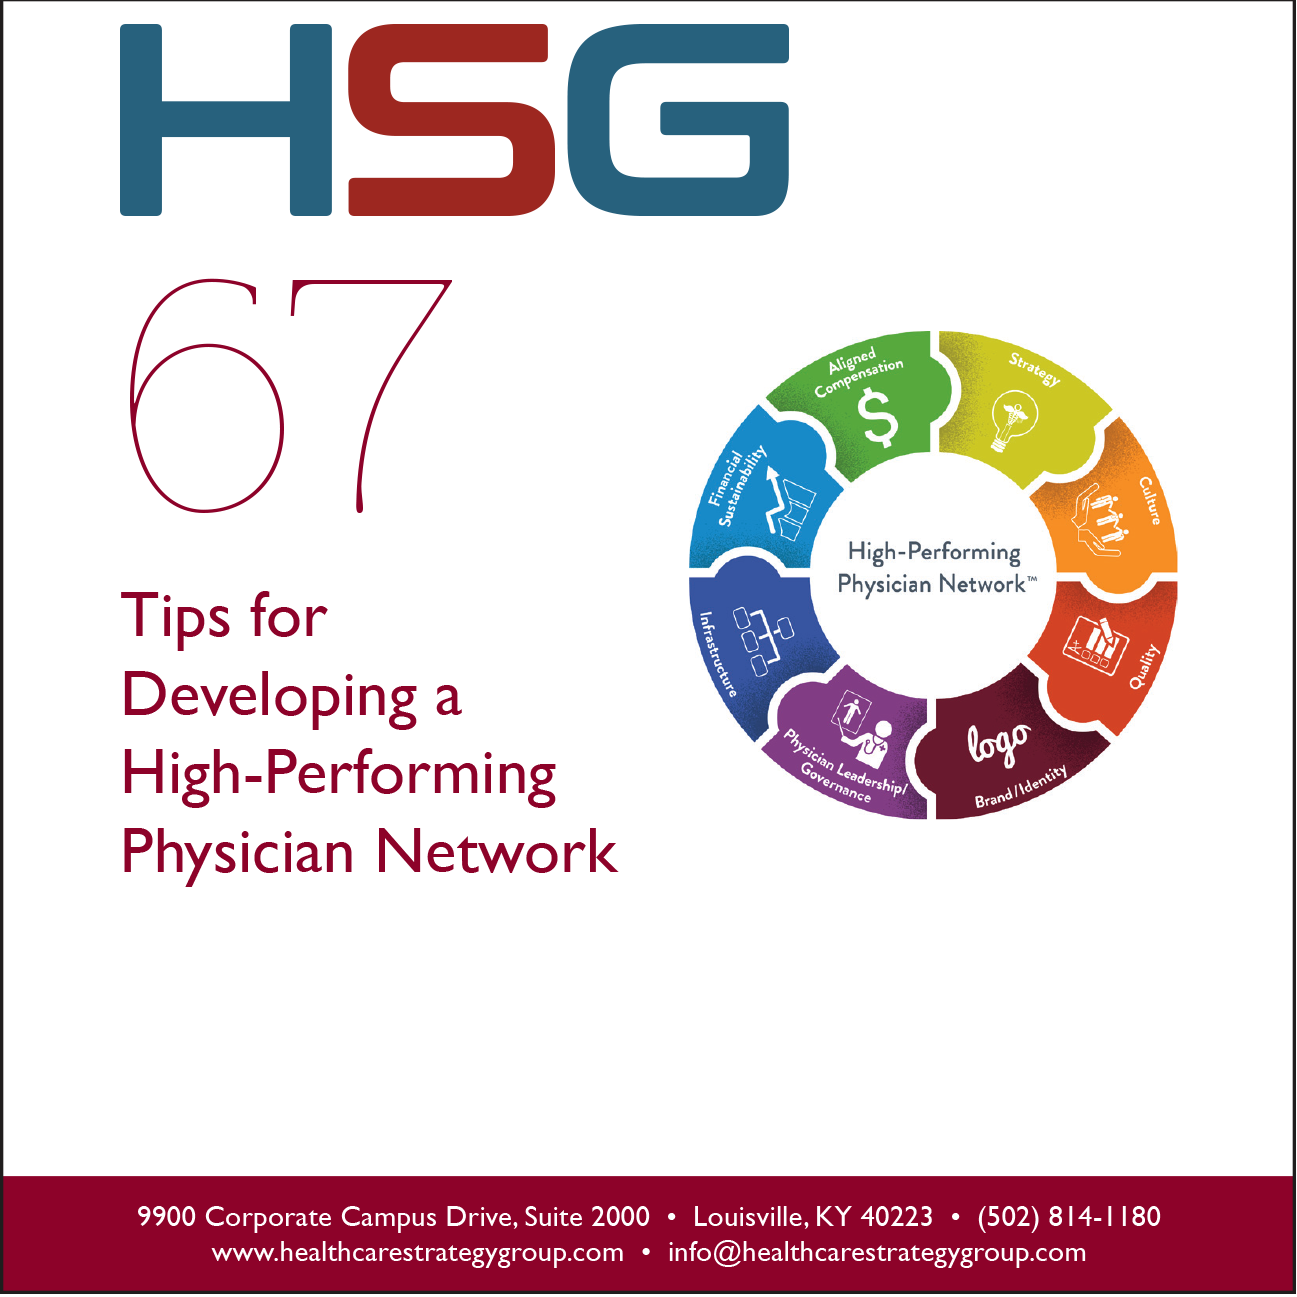 67 Tips for Developing a Hight-Performing Physician Network